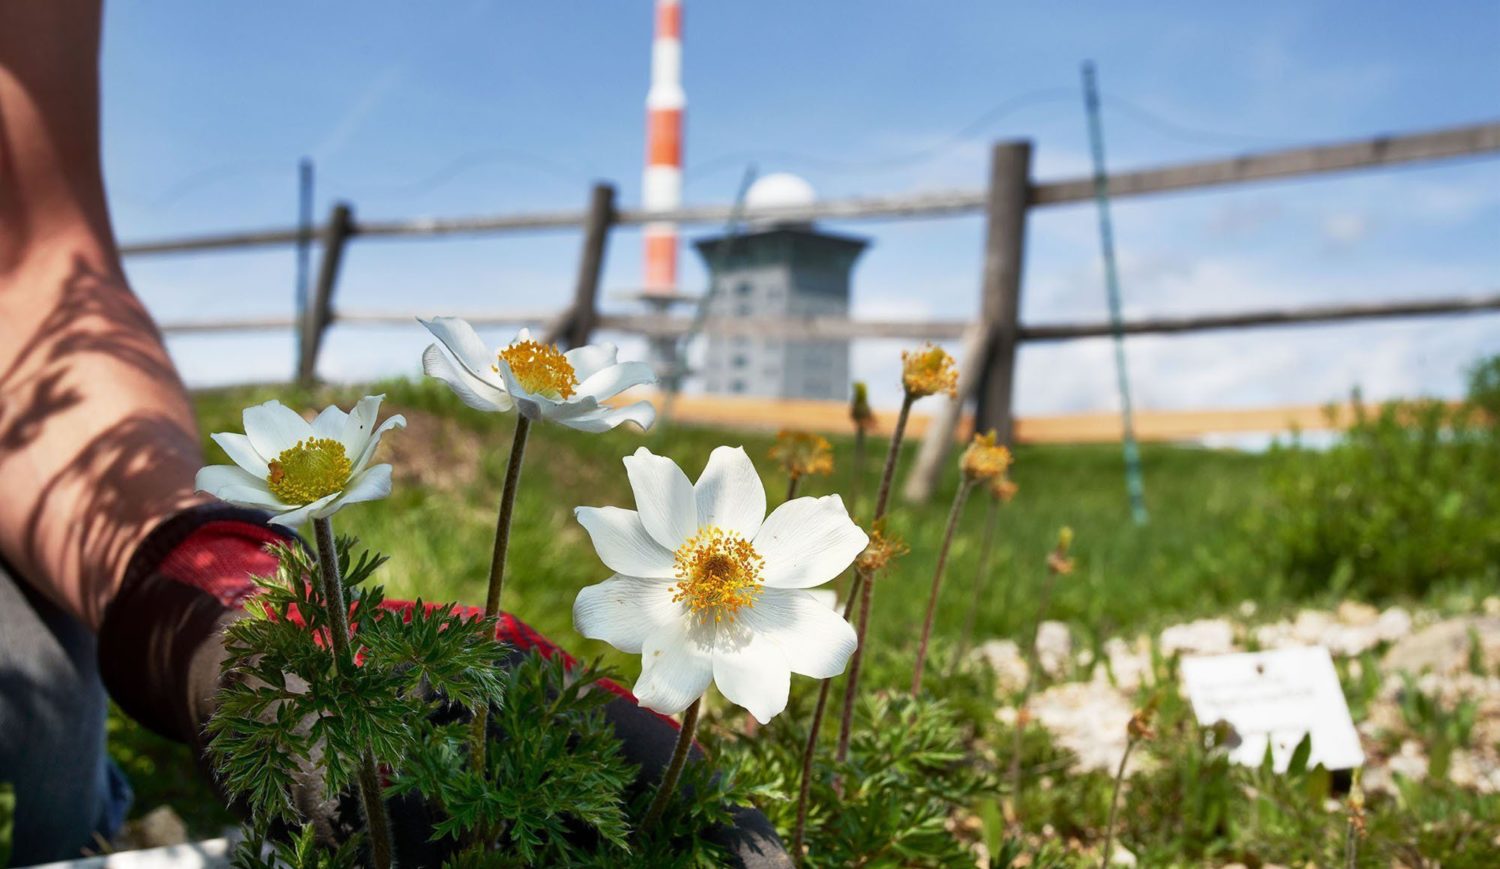 In the Harz National Park lies the Brocken Garden with the prominent weather station © IMG / Edgar Rodtmann